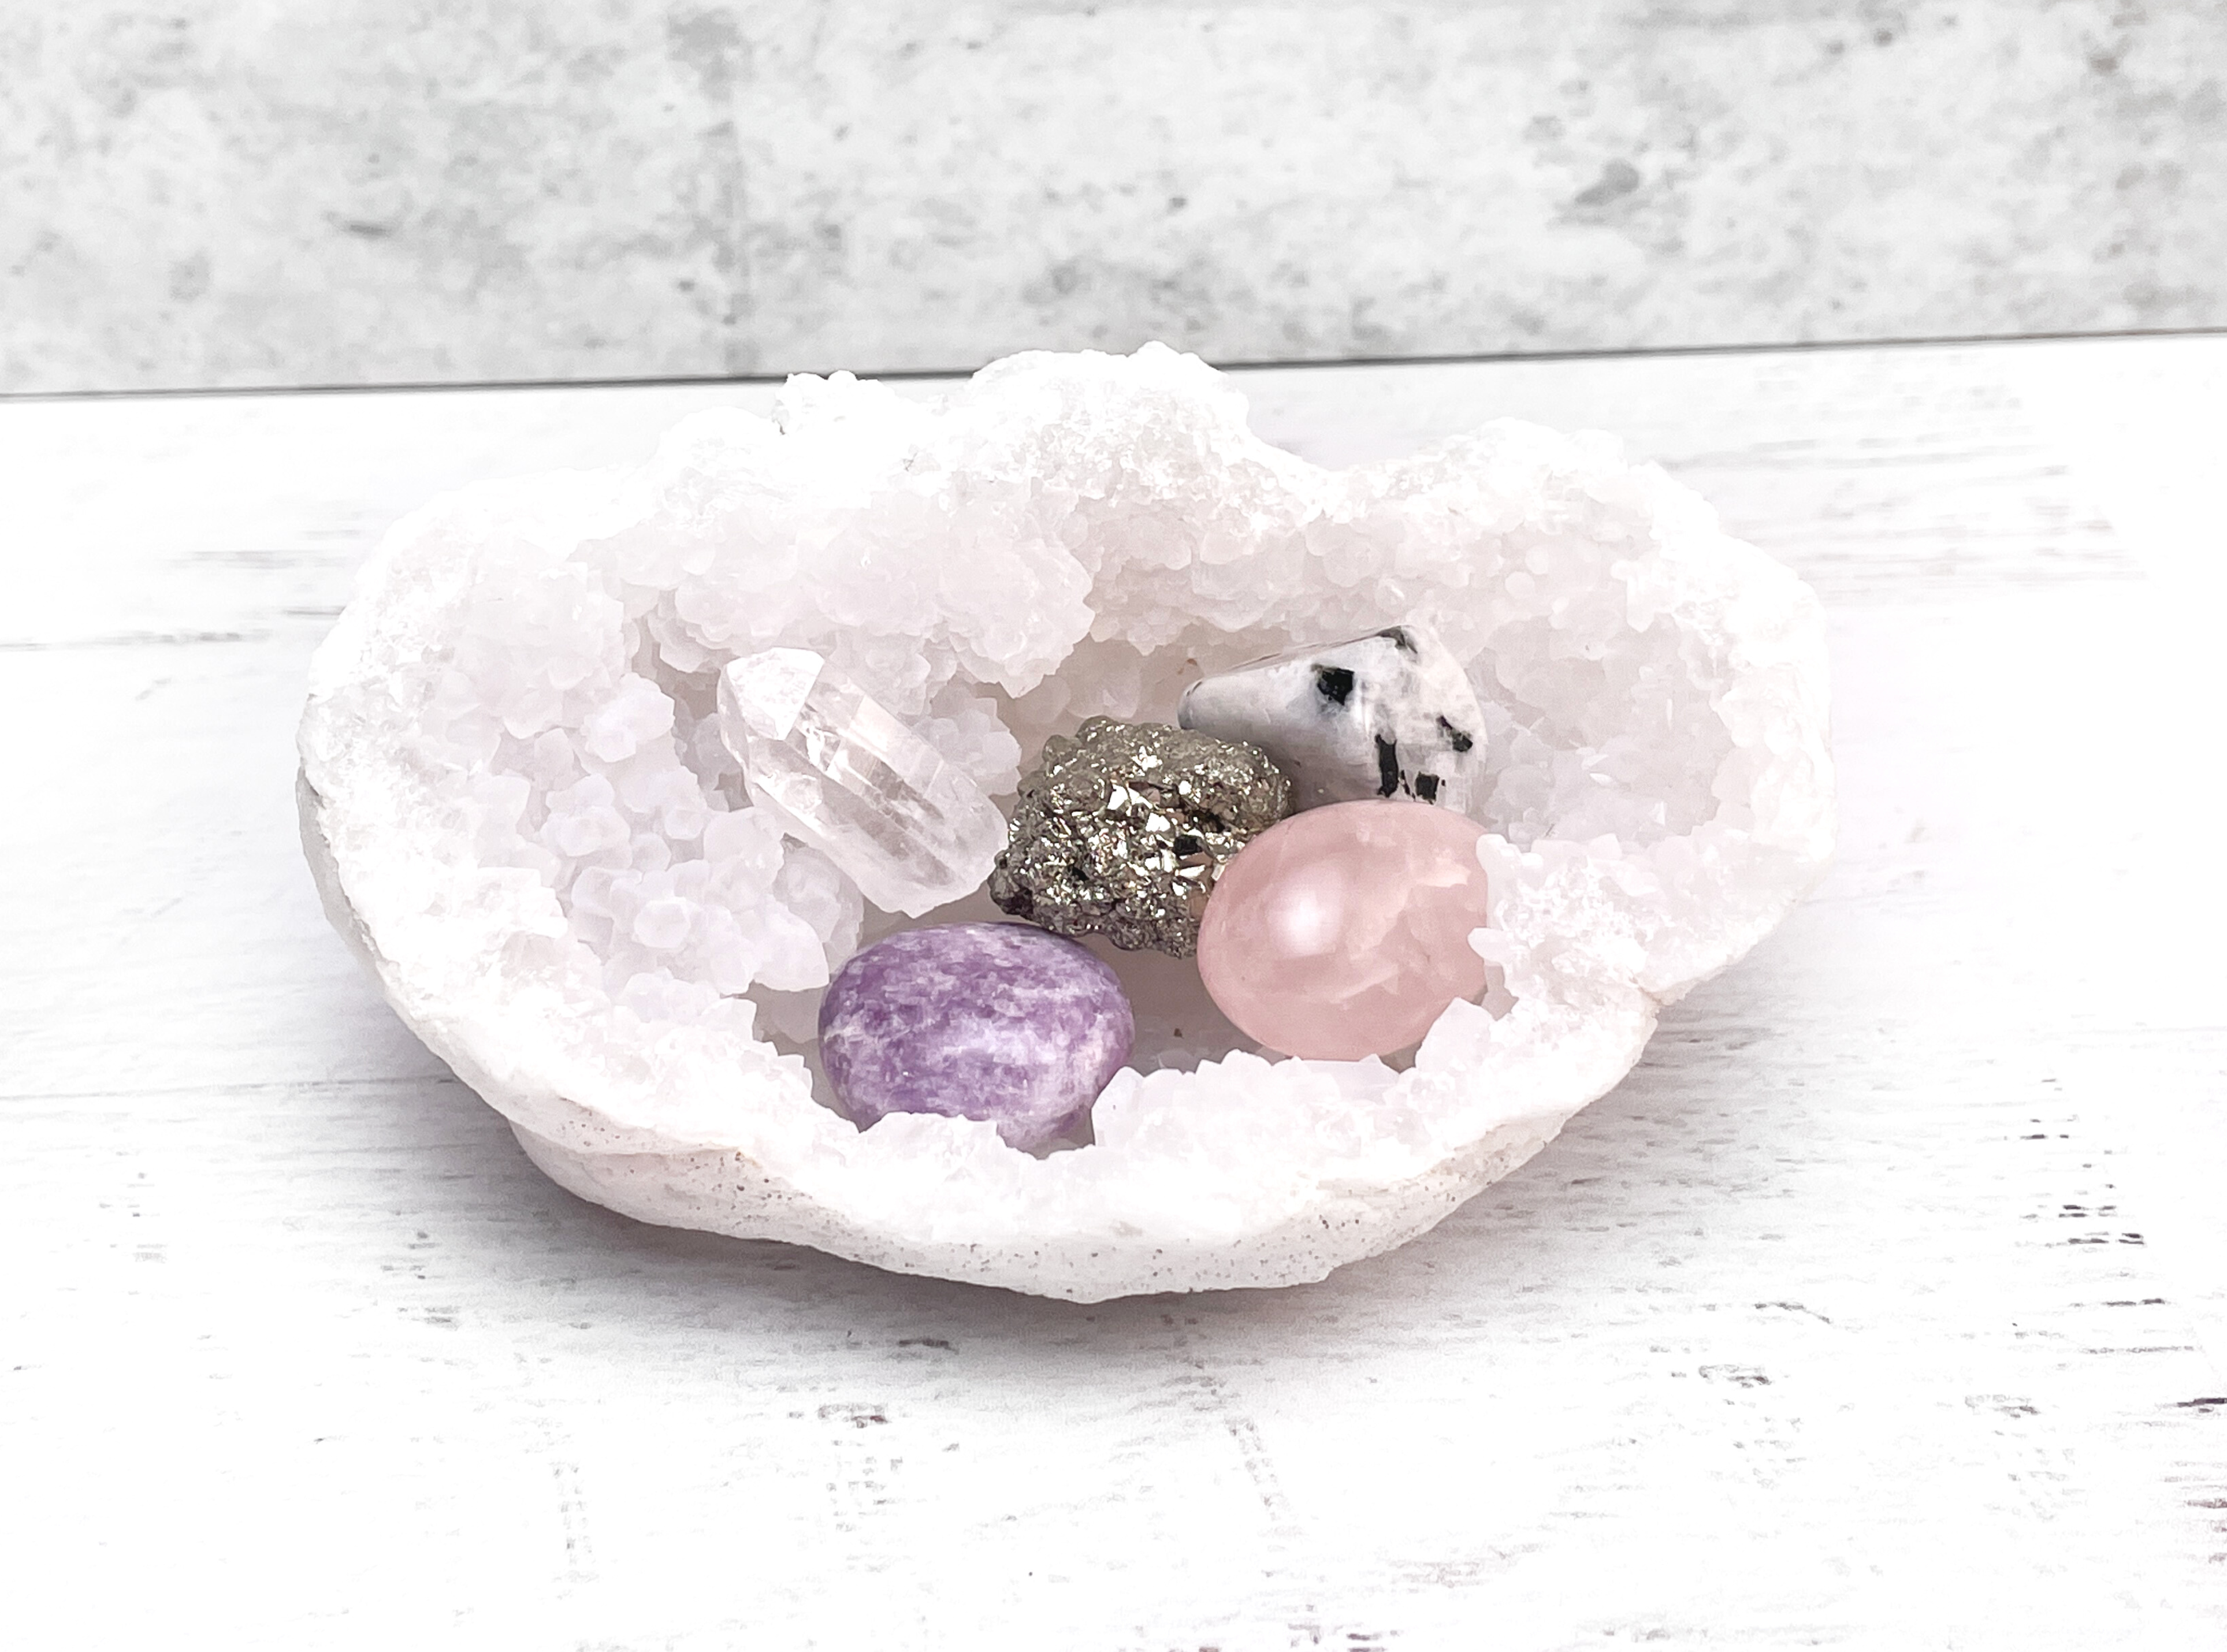 Buy Online Latest and Unique Grief & Loss Crystals Pocket Bundle | Shop Best Spiritual Items - The Mystical Ritual